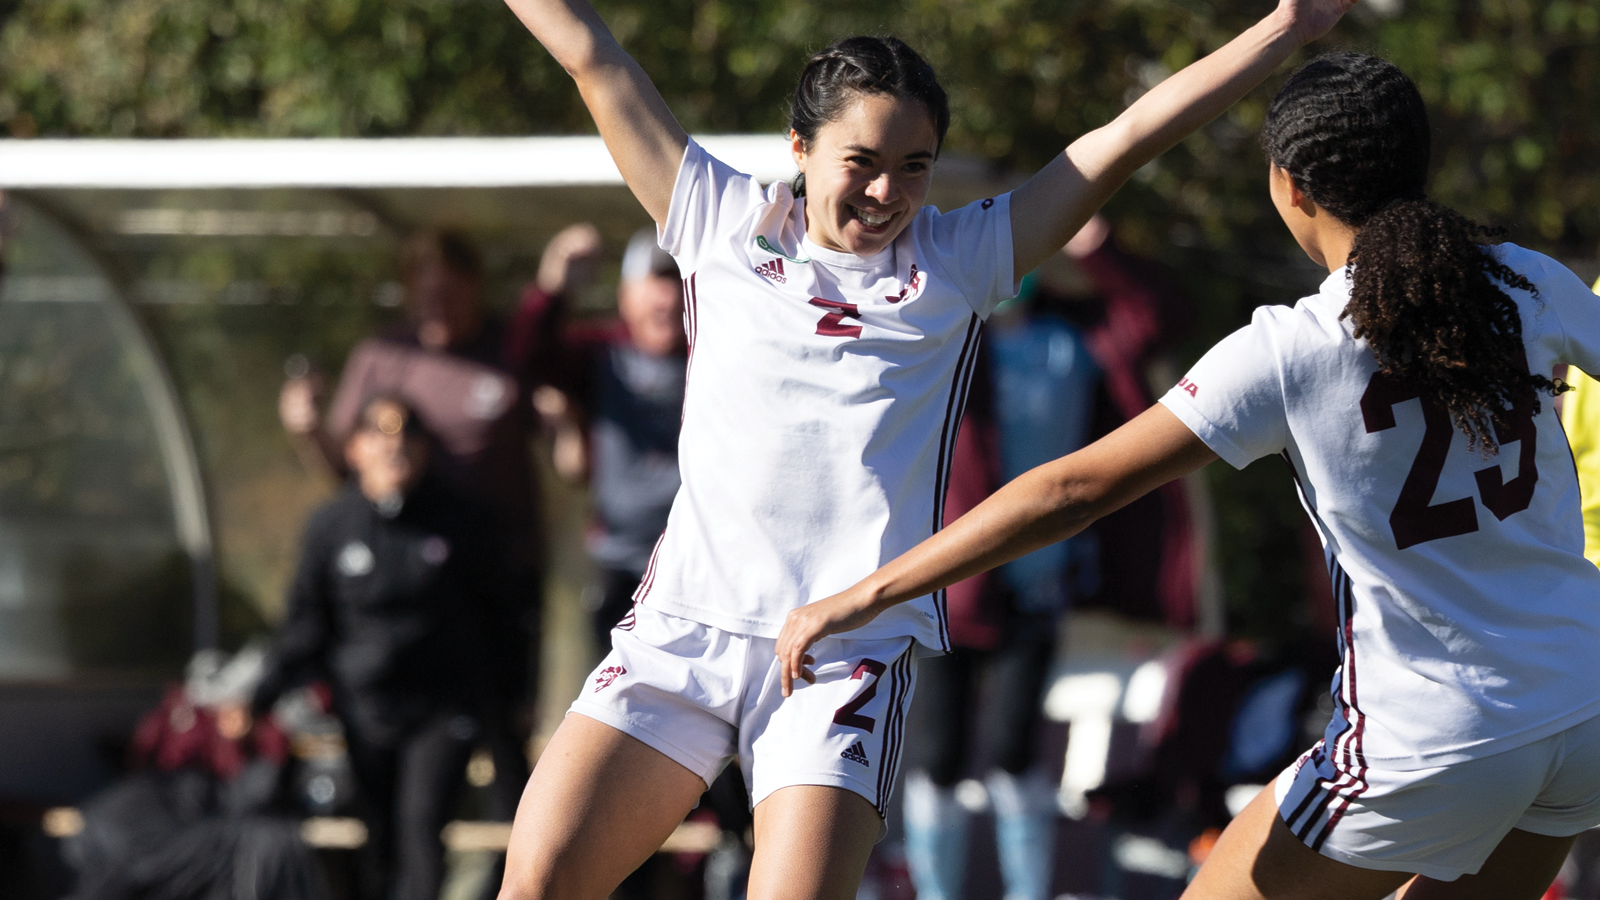 Ottawa women's soccer player Jenna Matsukubo celebrating on the field with her arms raised in the air